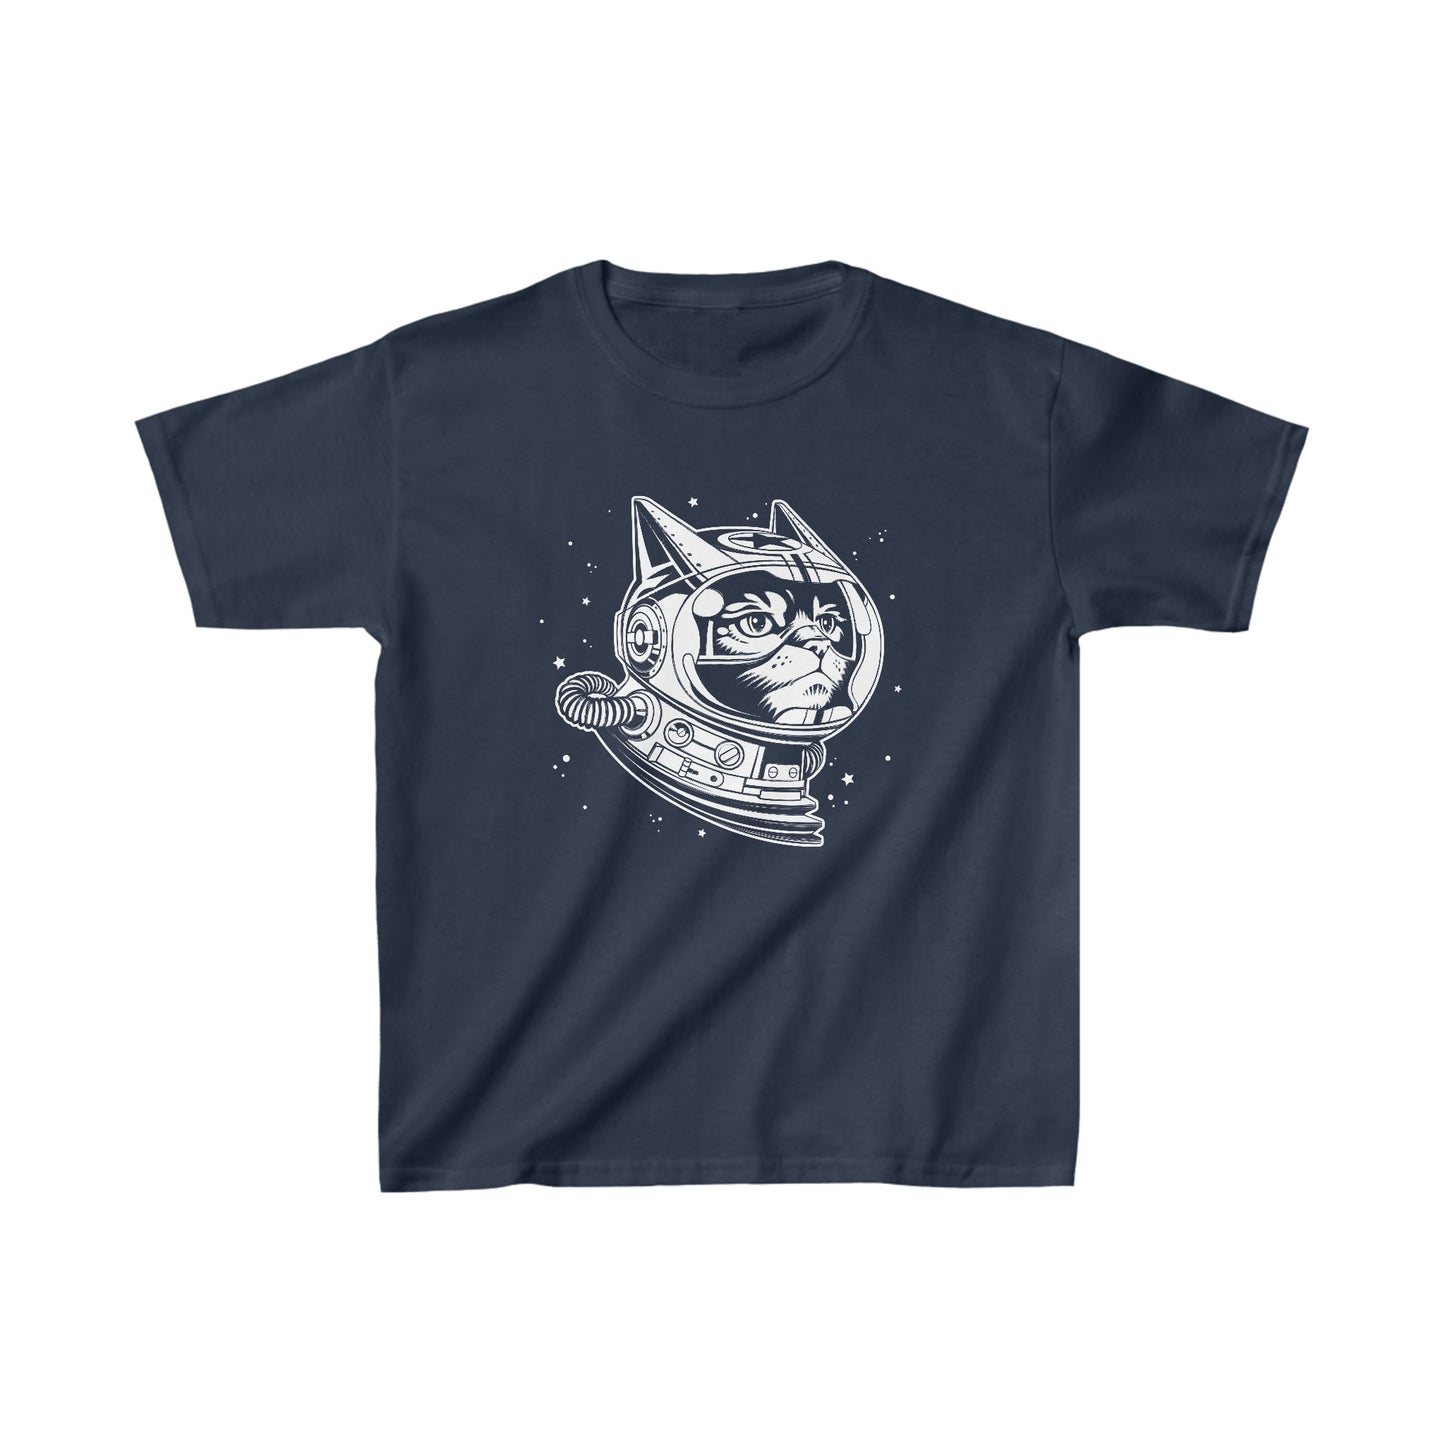 Space Cat Kids Heavy Cotton Graphic Tee